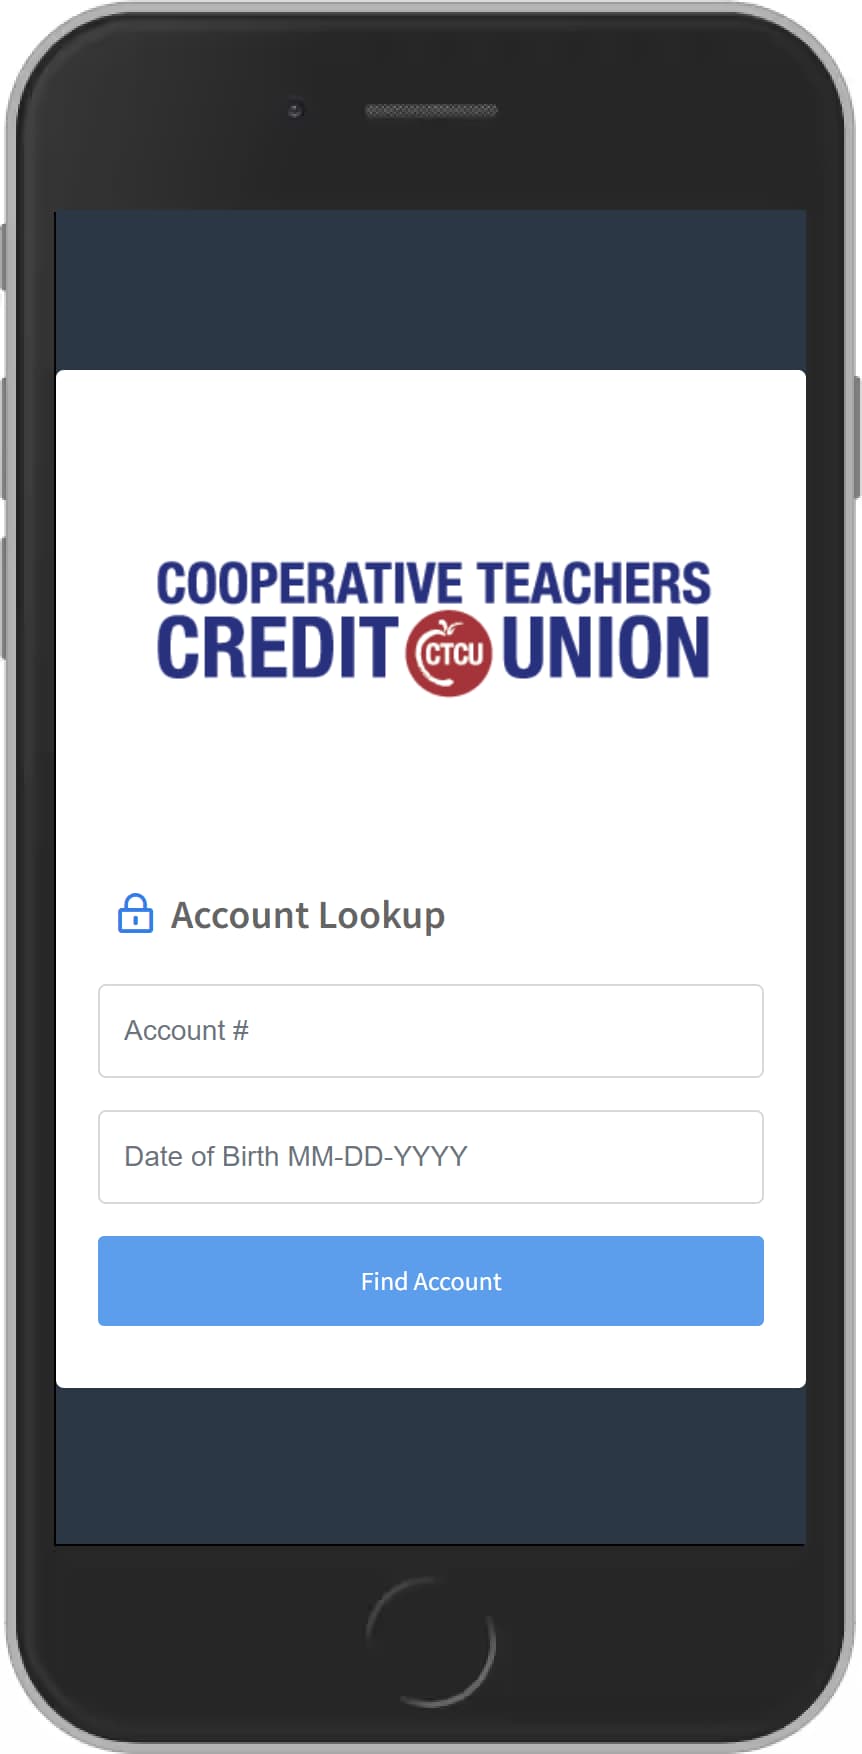 Making a Loan Payment is now easier than ever with CTCU, Lookup your account